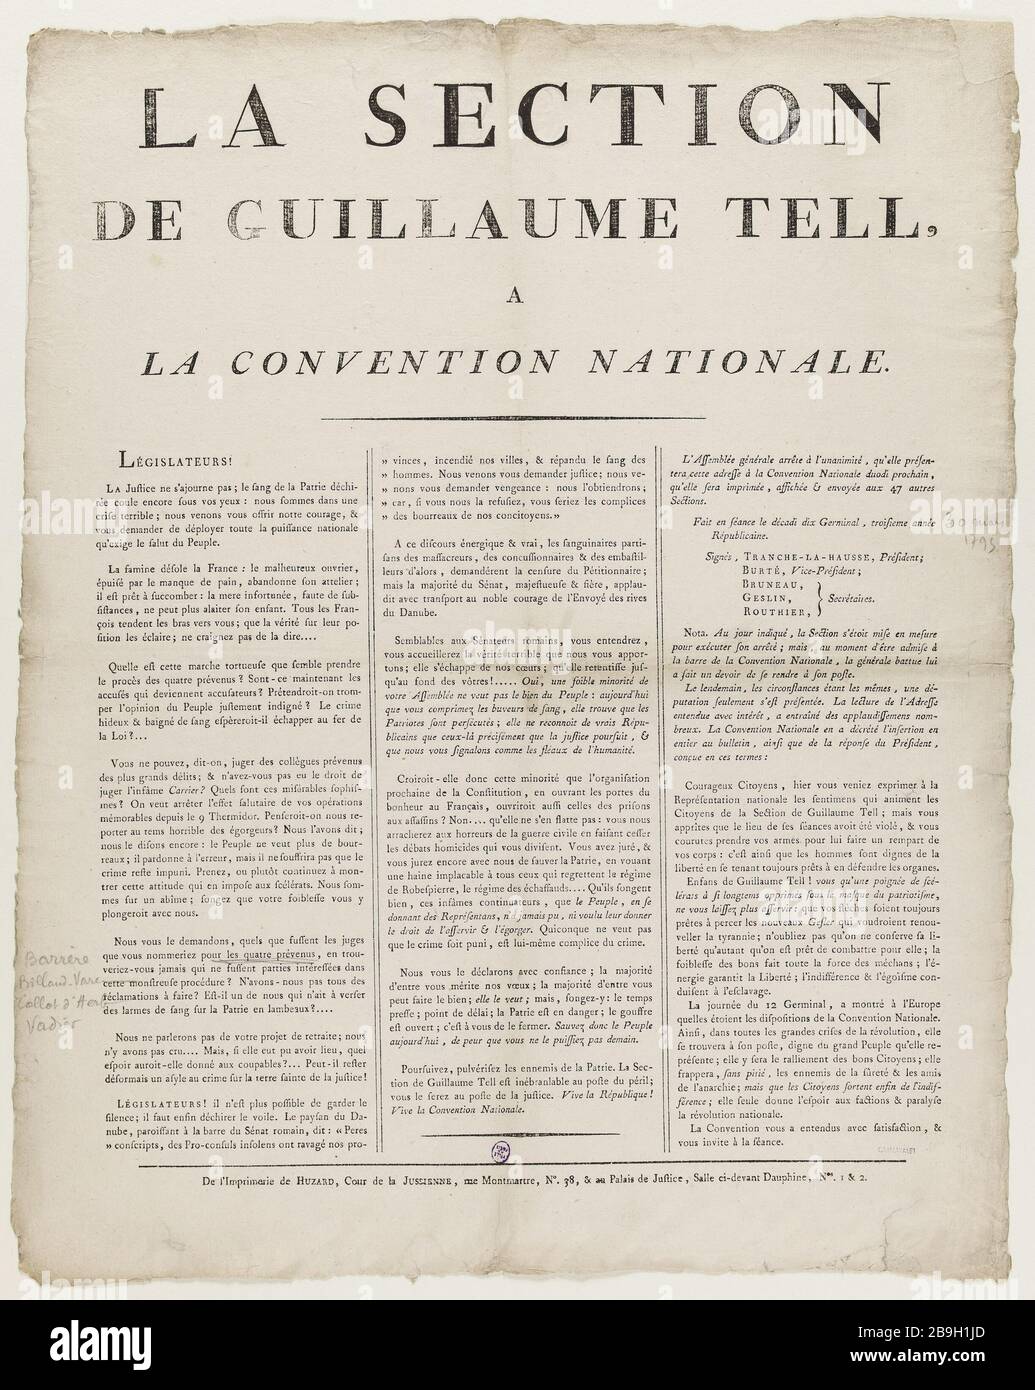 SECTION OF WILLIAM TELL THE NATIONAL CONVENTION Anonyme. 'La section de Guillaume Tell à la Convention Nationale'. Typographie. 1795. Paris, musée Carnavalet. Stock Photo